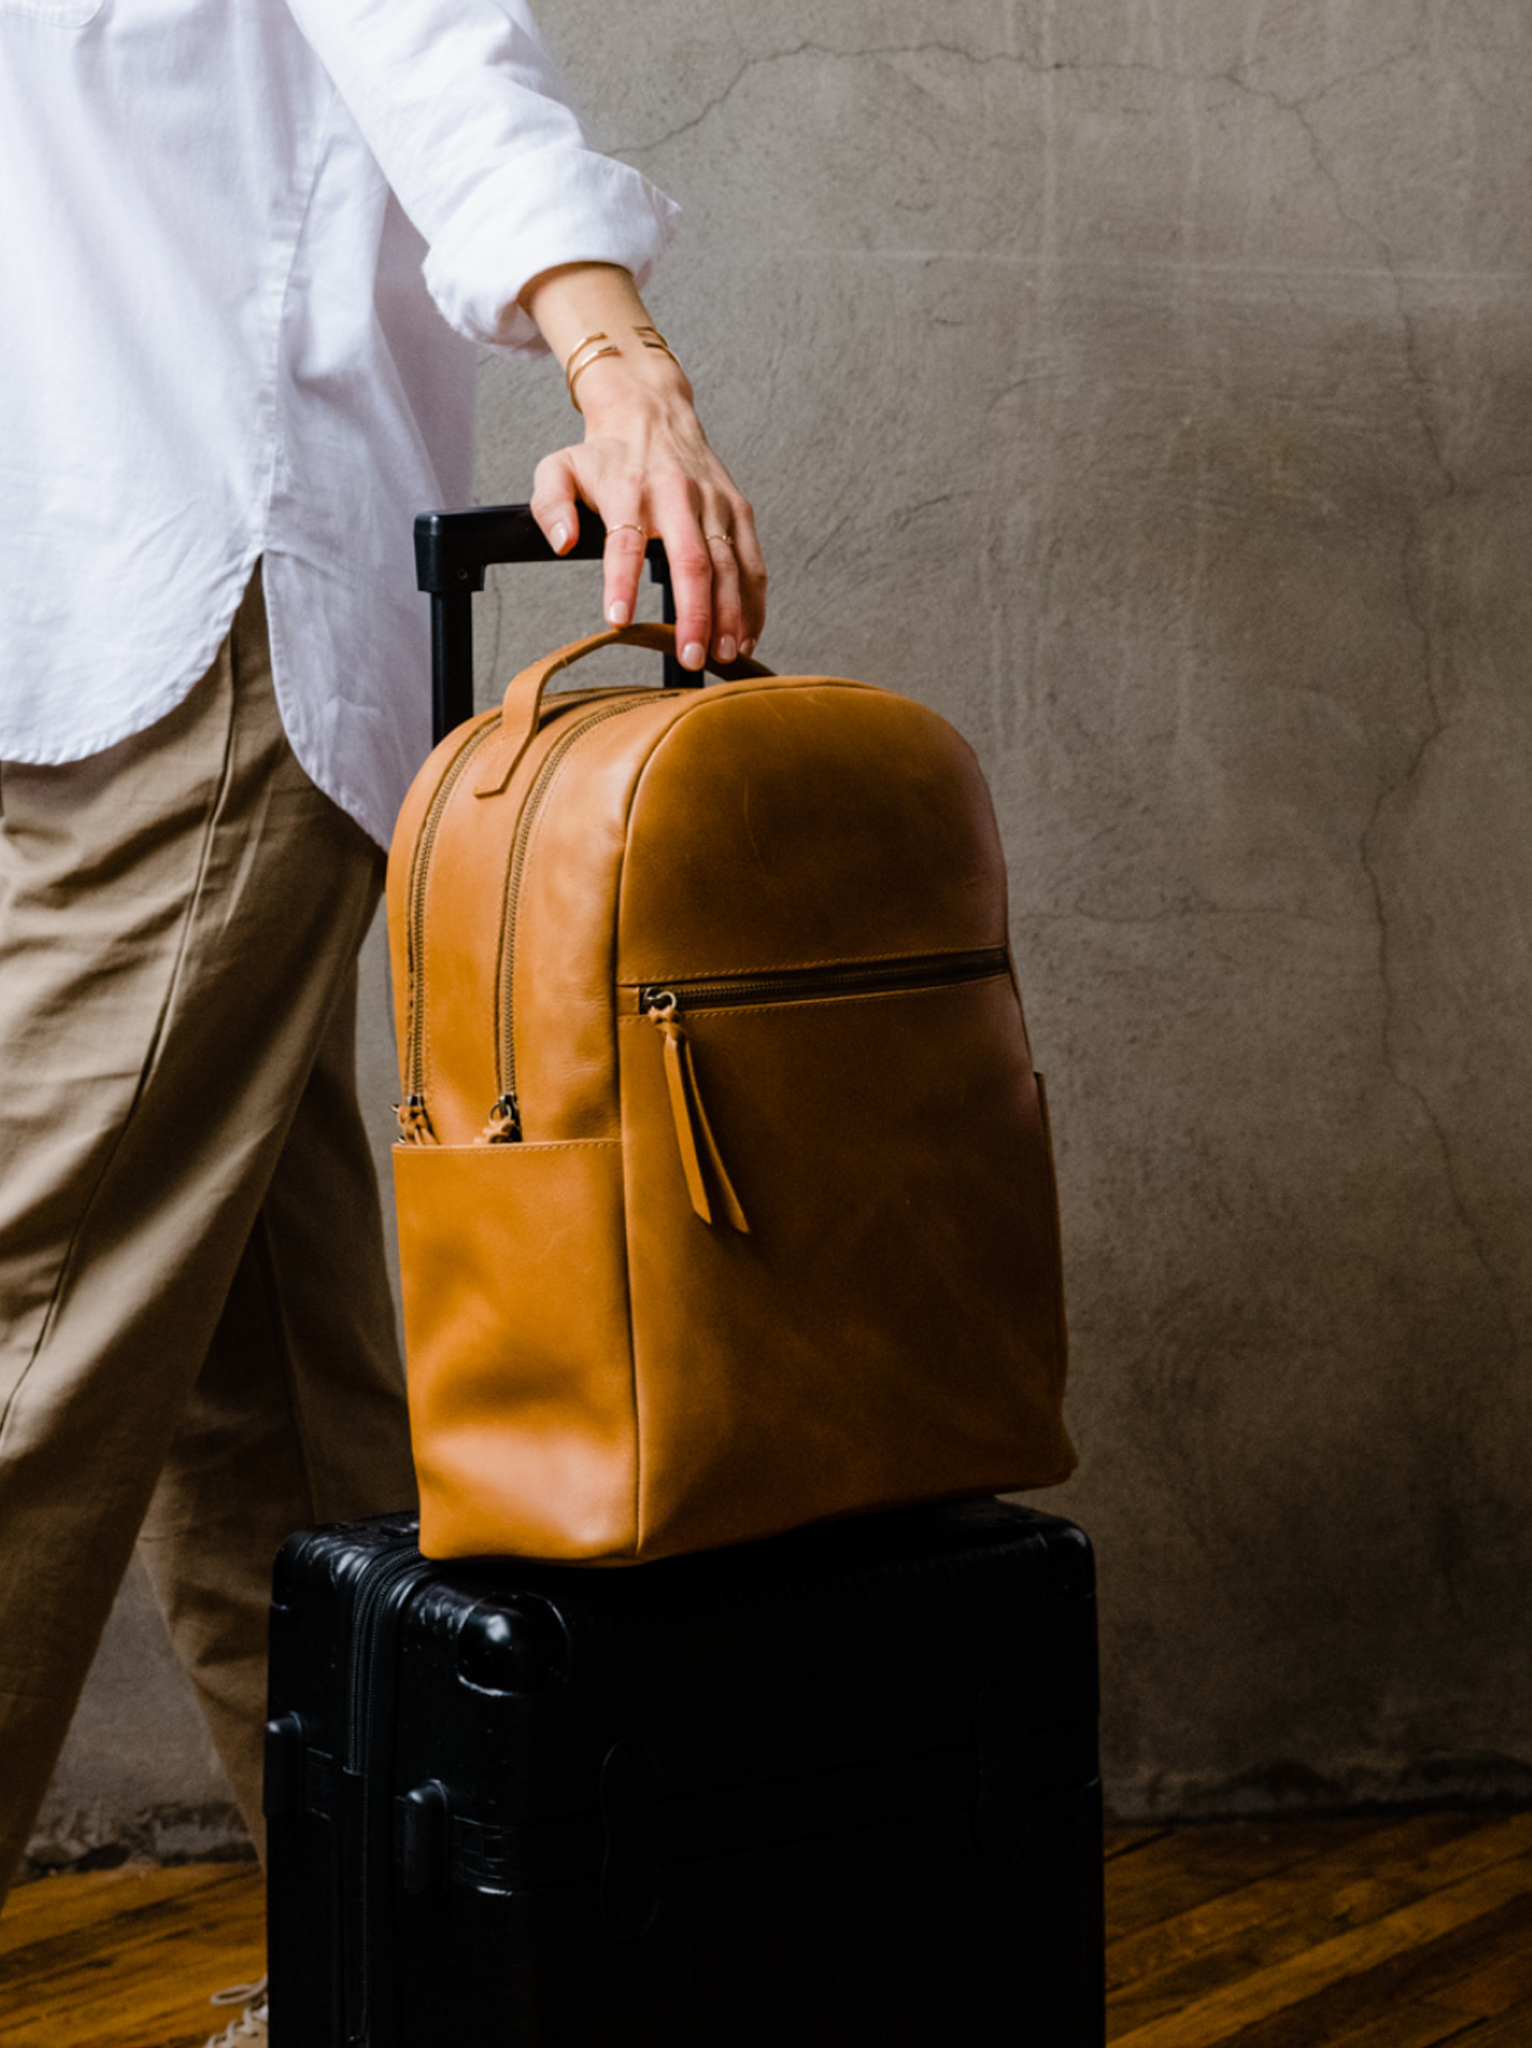 Person resting hand on a brown leather backpack atop a black suitcase against a textured wall.